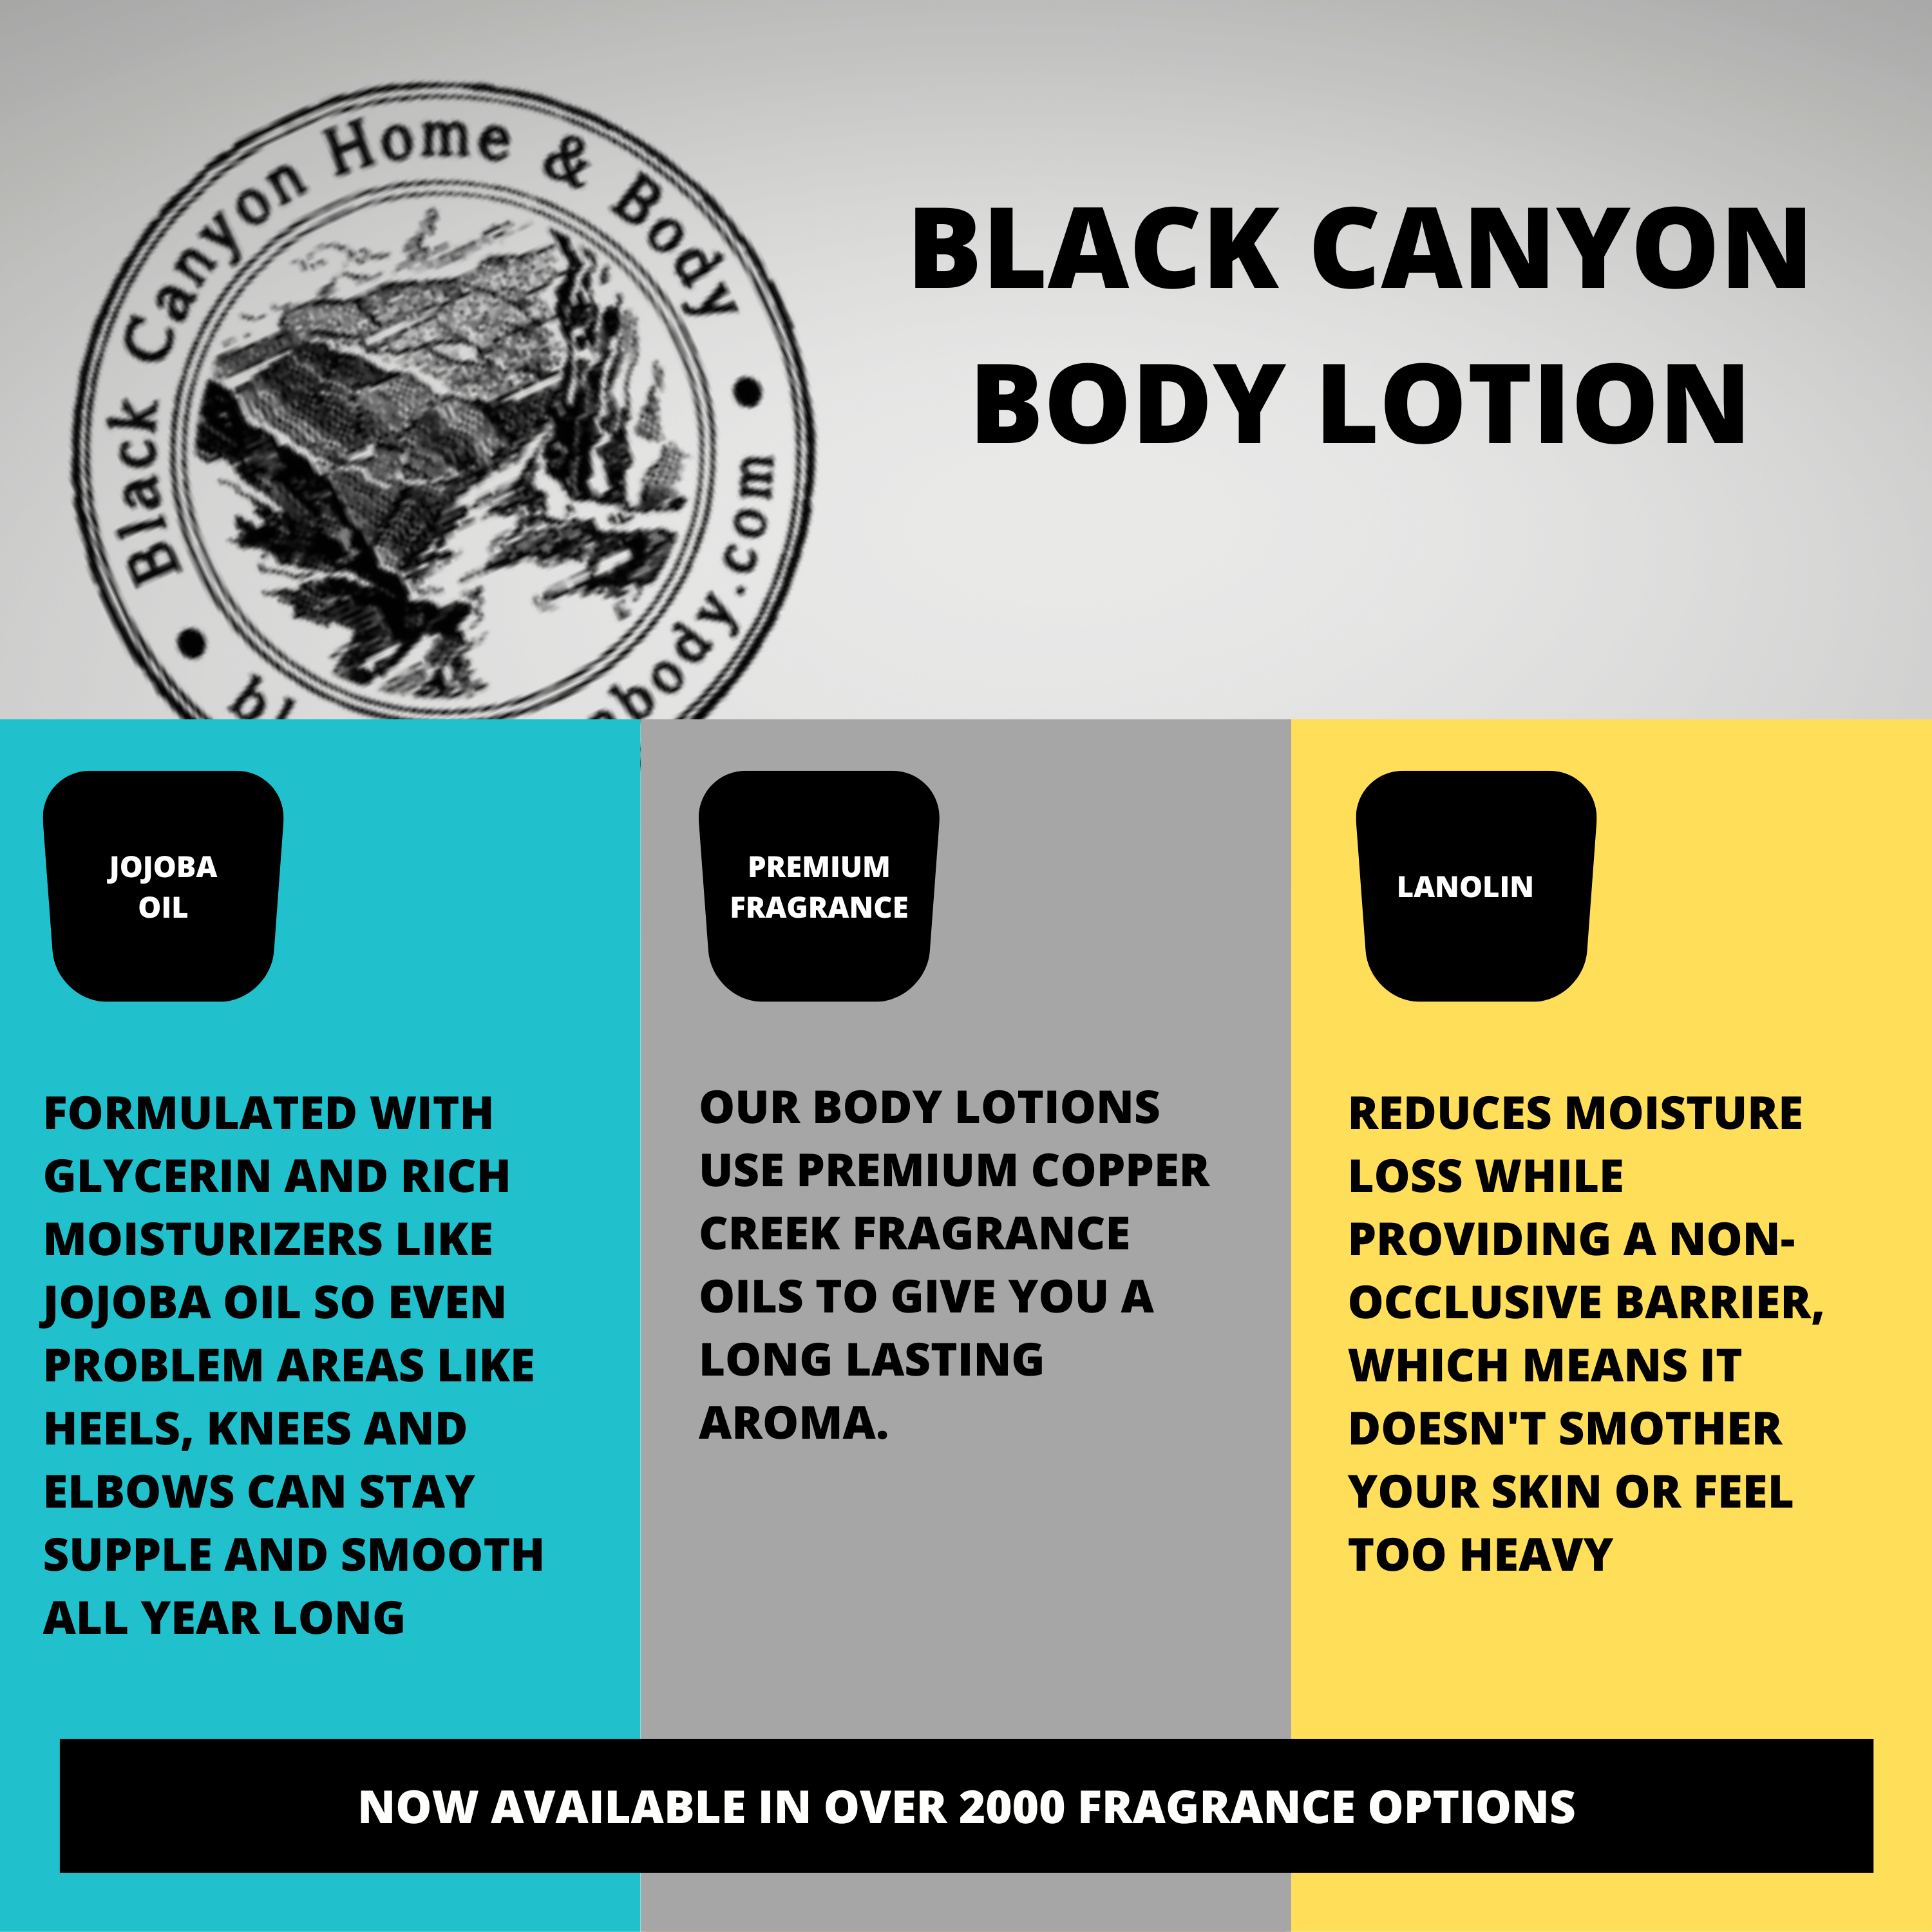 Black Canyon Bananas Flambe Scented Luxury Body Lotion with Lanolin and Jojoba Oil